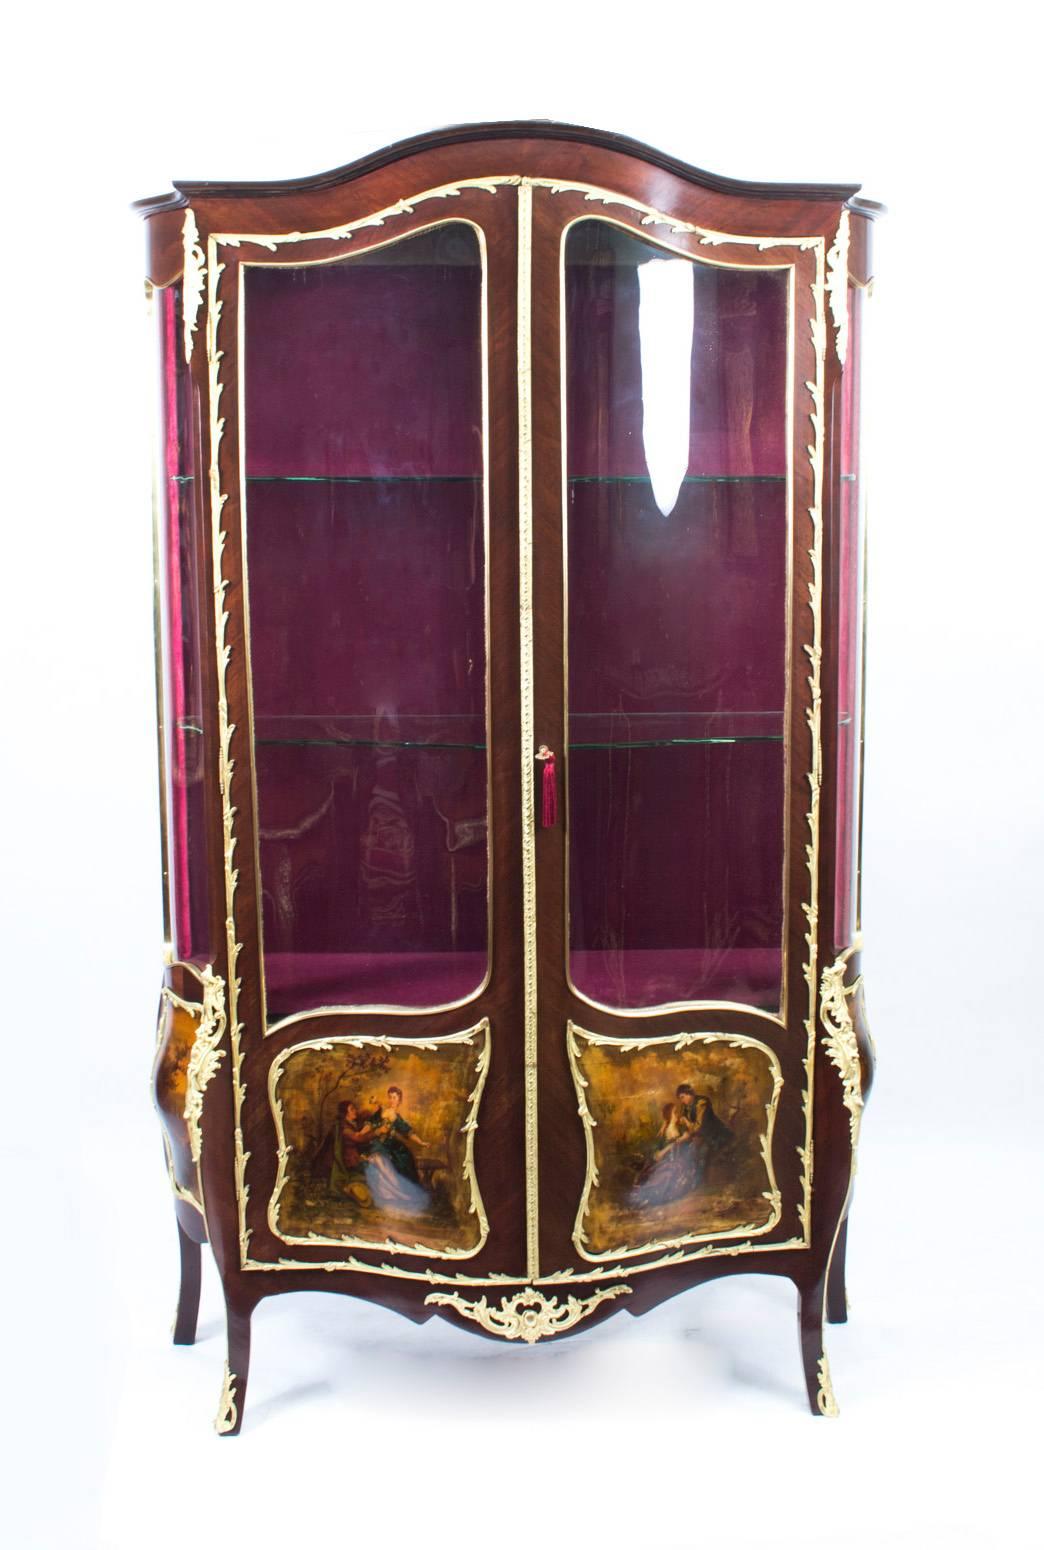 A stunning antique French kingwood and Vernis Martin serpentine vitrine in the Louis XV manner, circa 1880 in date.

It has three quarter glazed panelled doors with exquisite hand-painted decoration and exquisite ormolu mounts. There are four